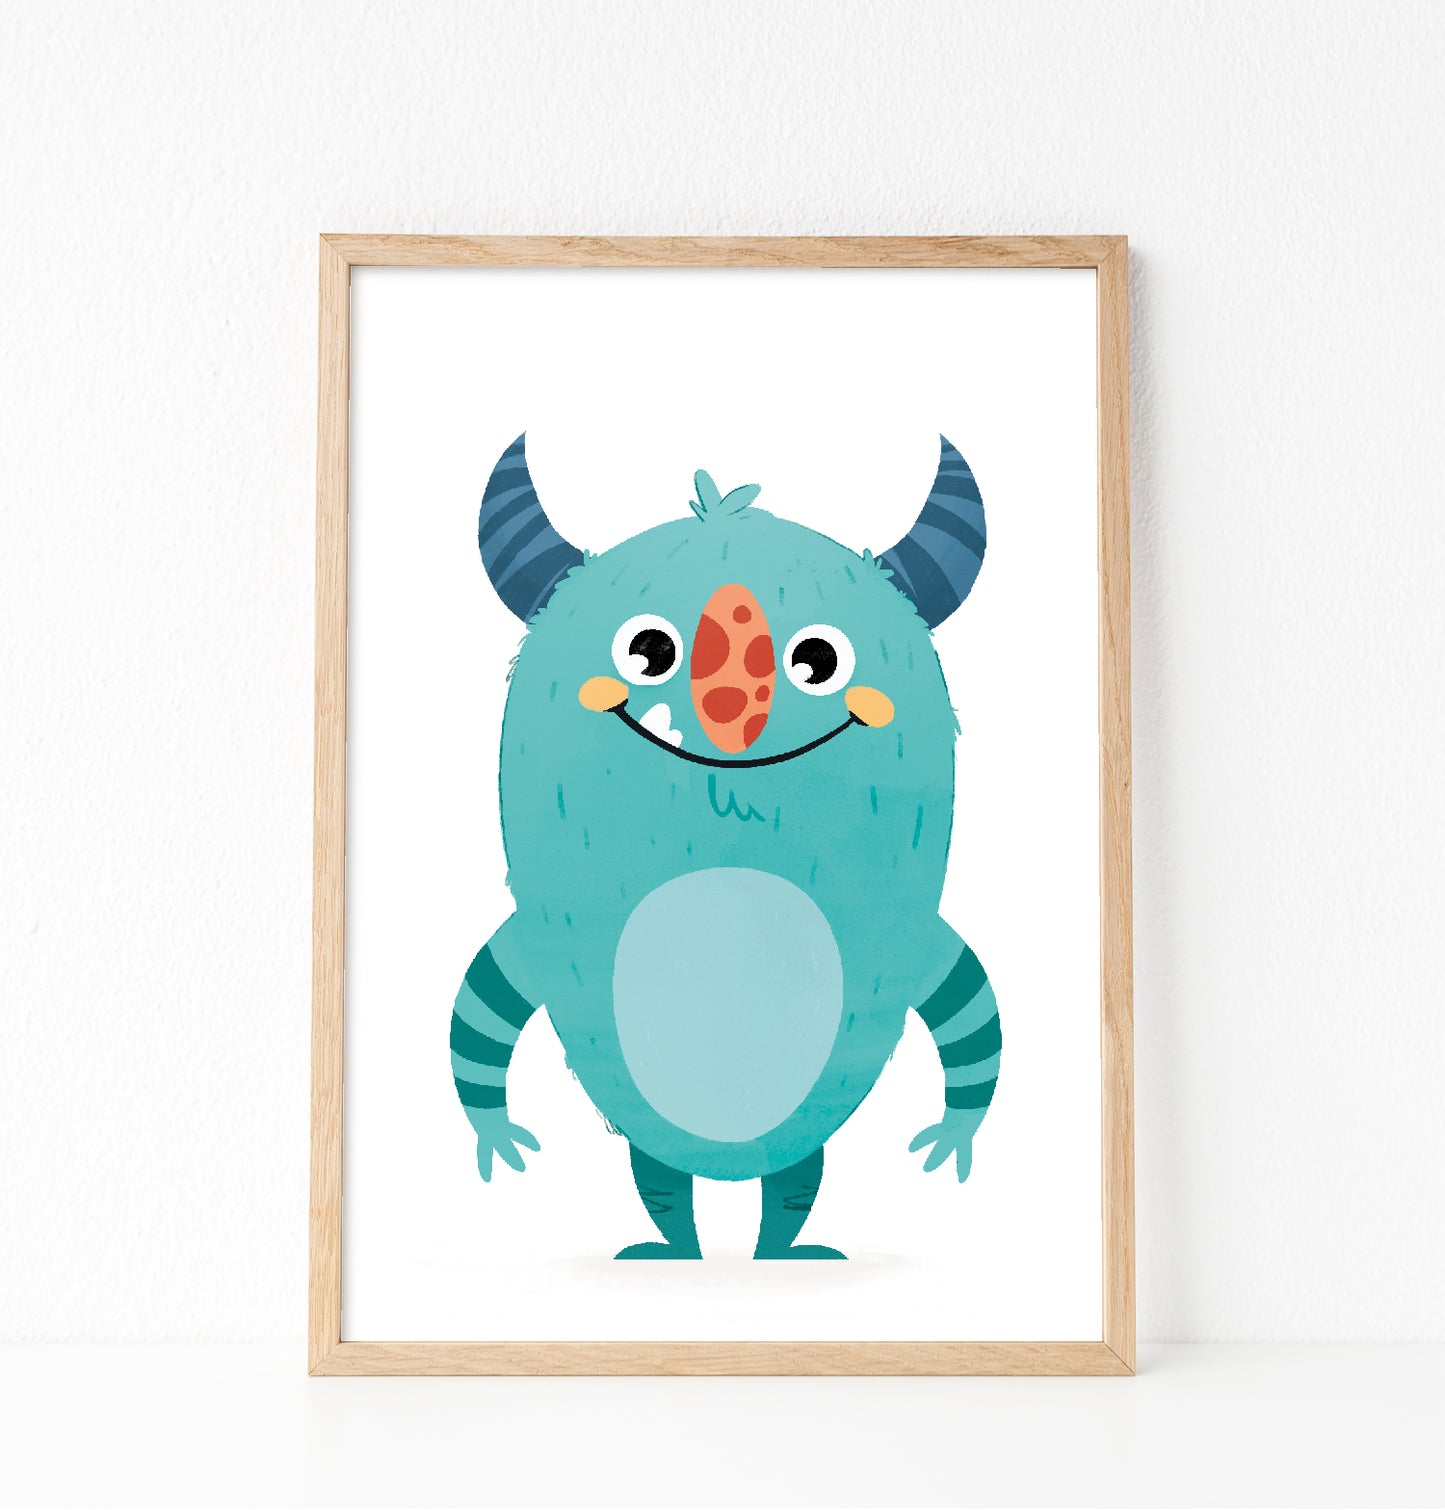 Silly green monster print